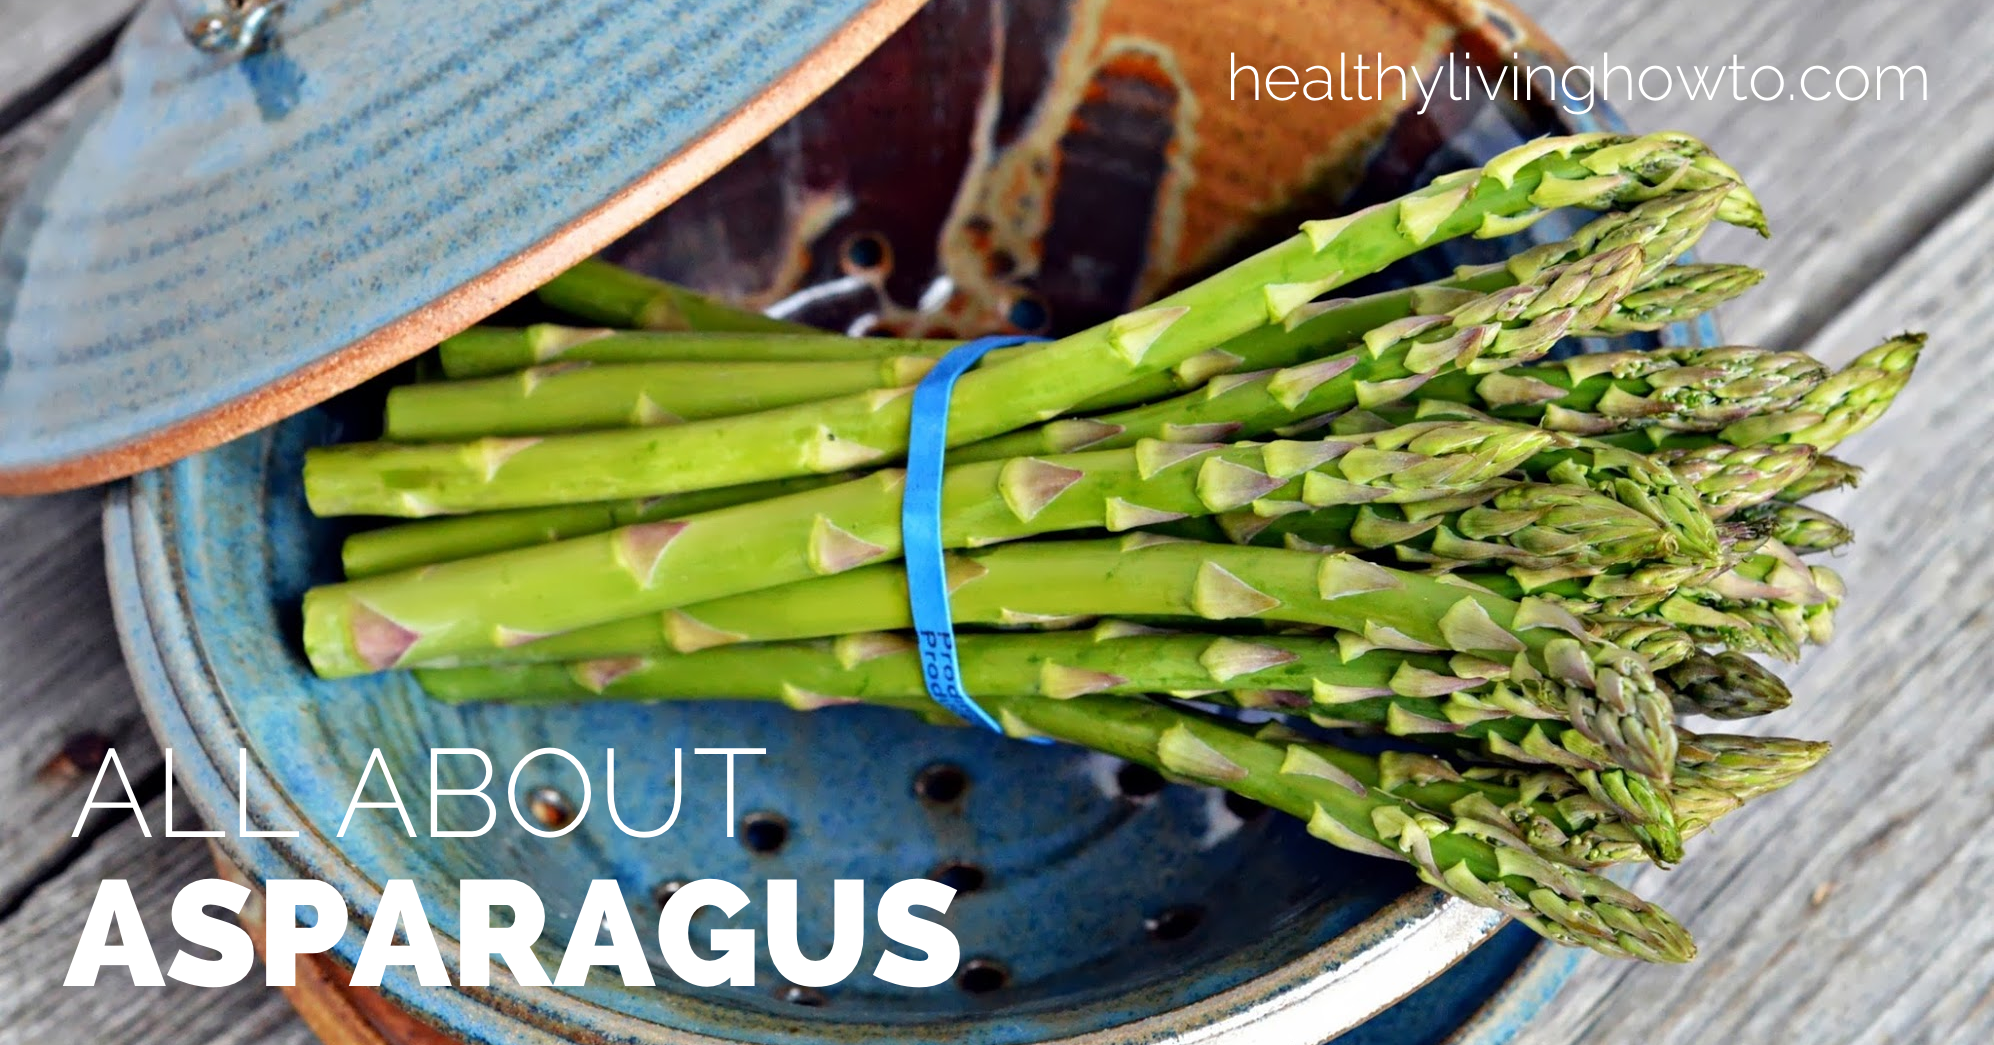 All About Asparagus | healthylivinghowto.com